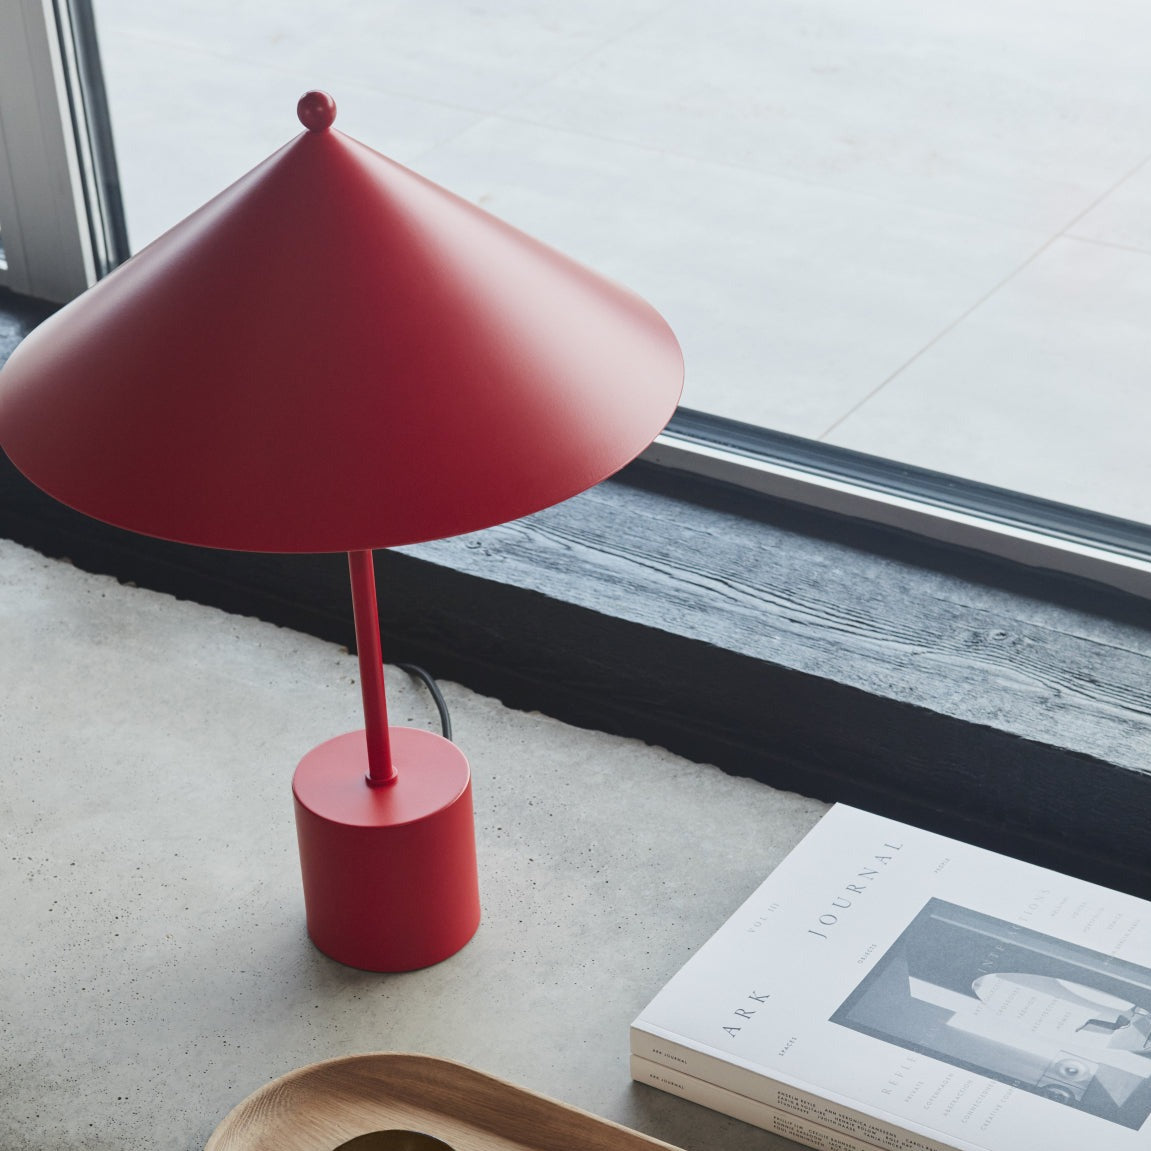 Kasa Table Lamp - Cherry Red